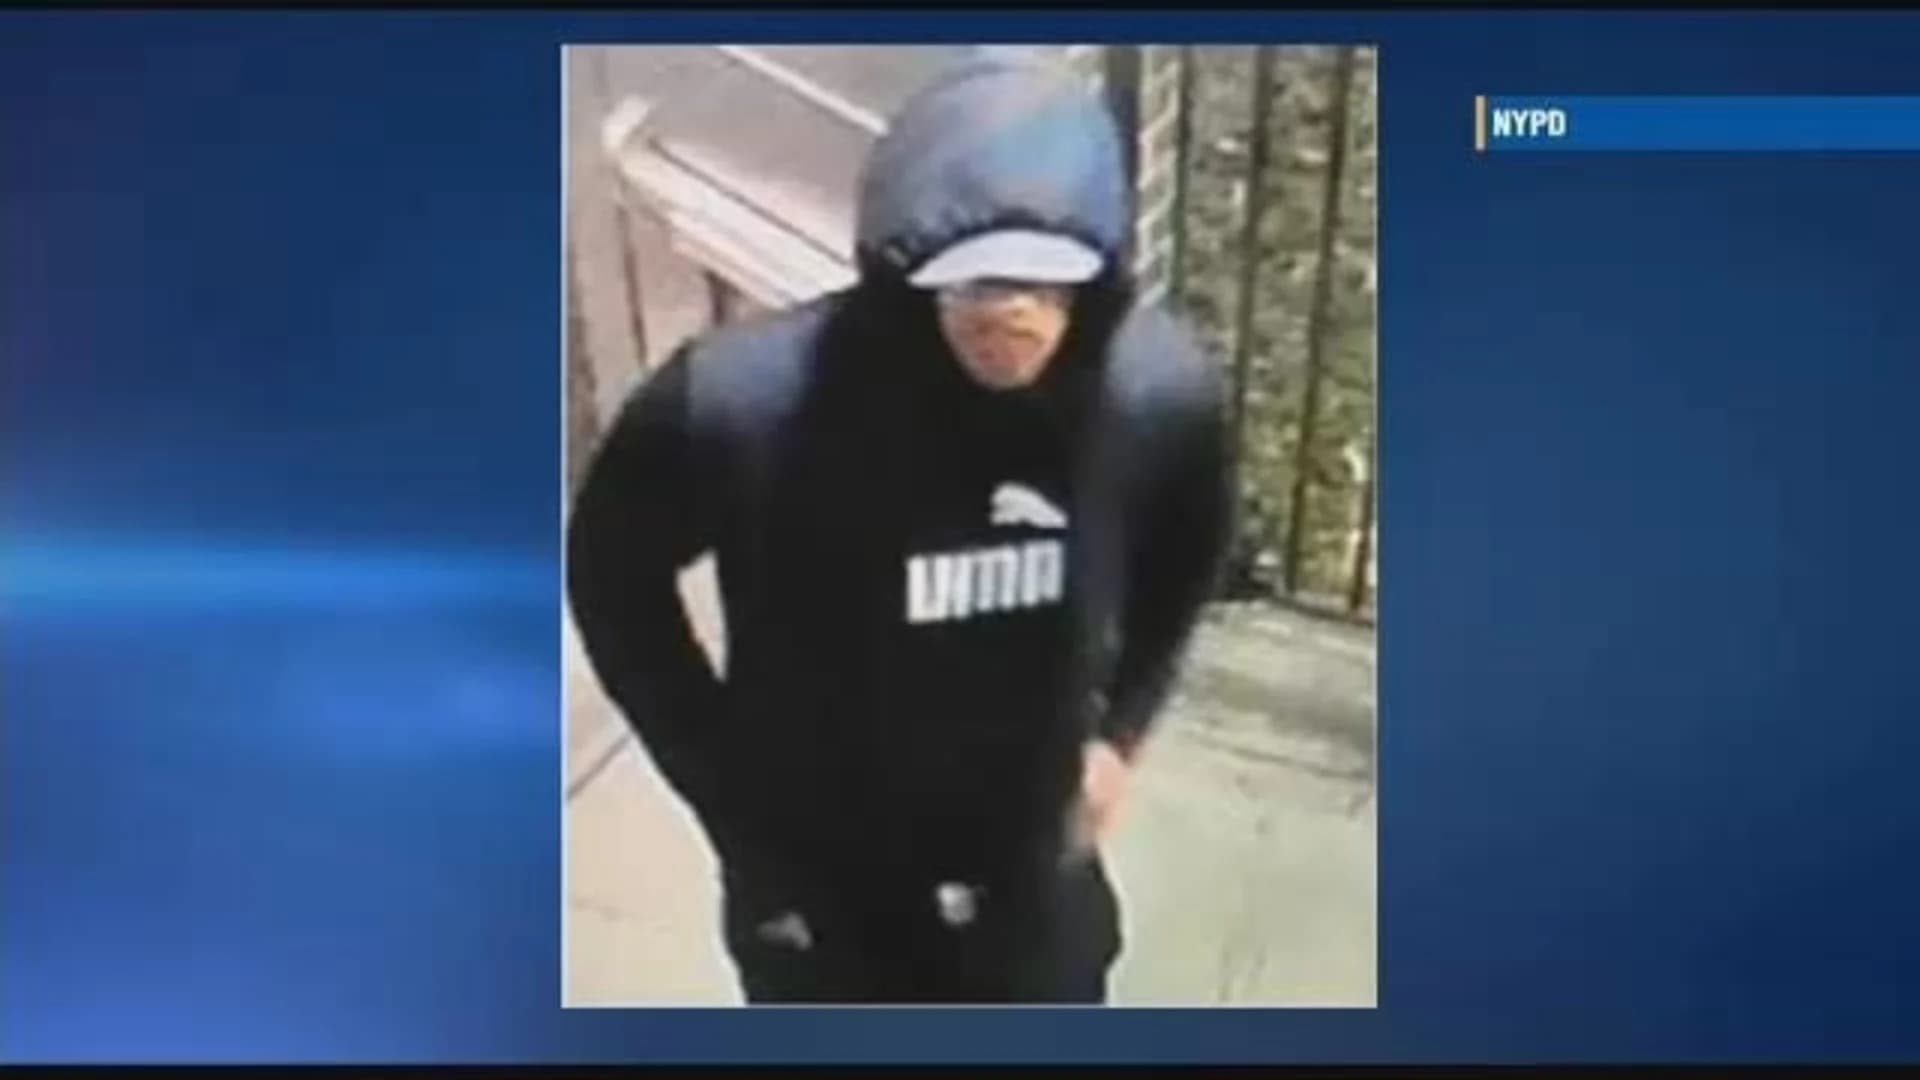 WATCH: Police release video of suspect wanted for shooting 22-year-old in Bed-Stuy